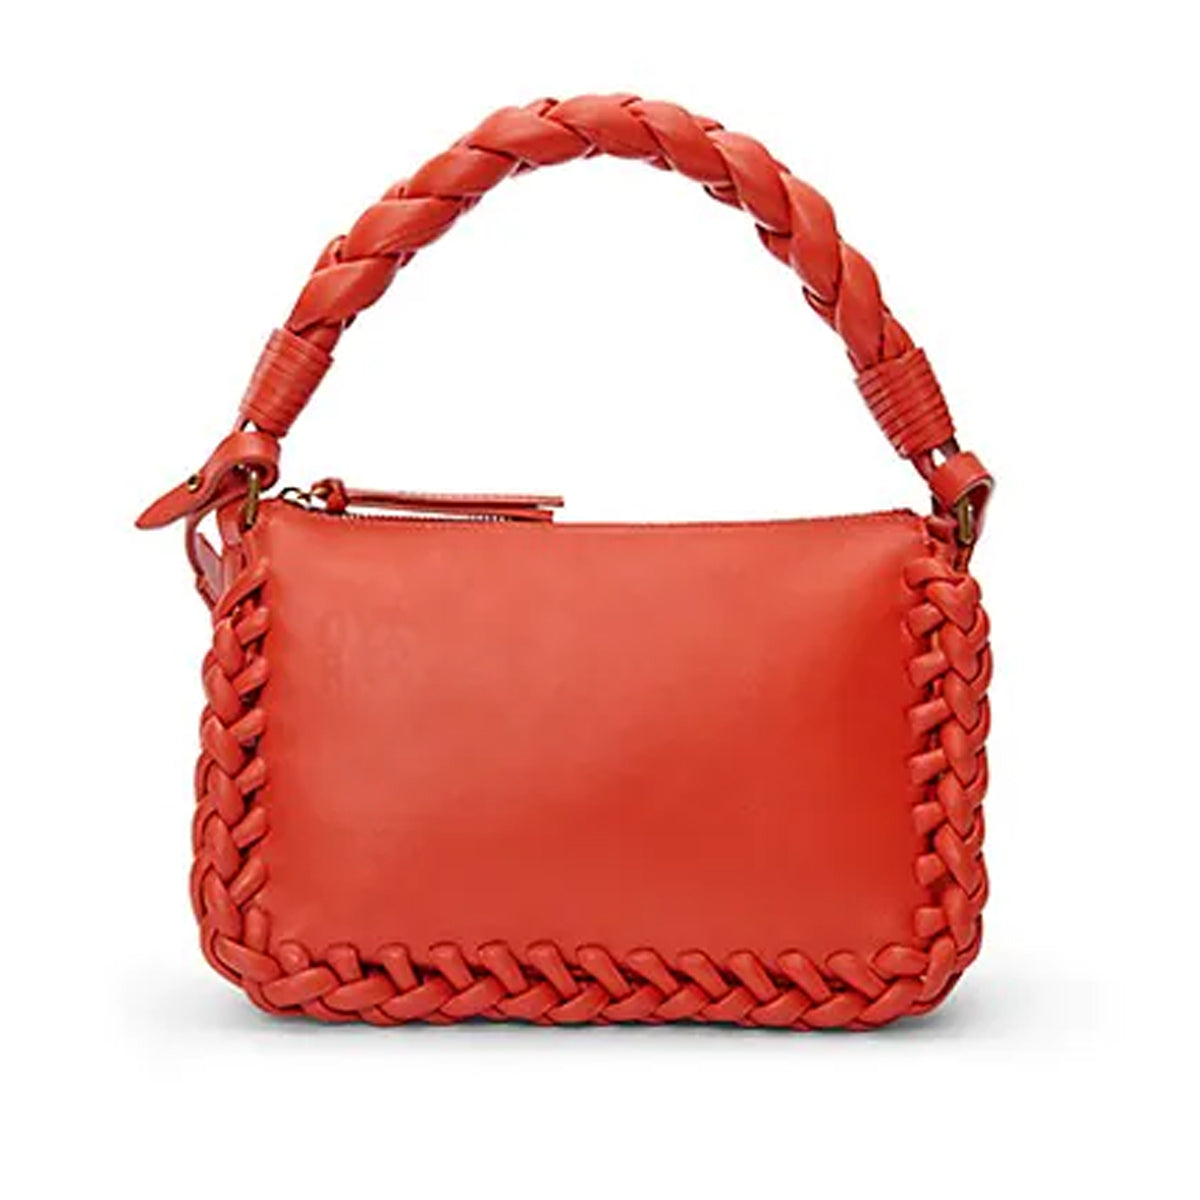 Braided Top Handle Small Bag in Red